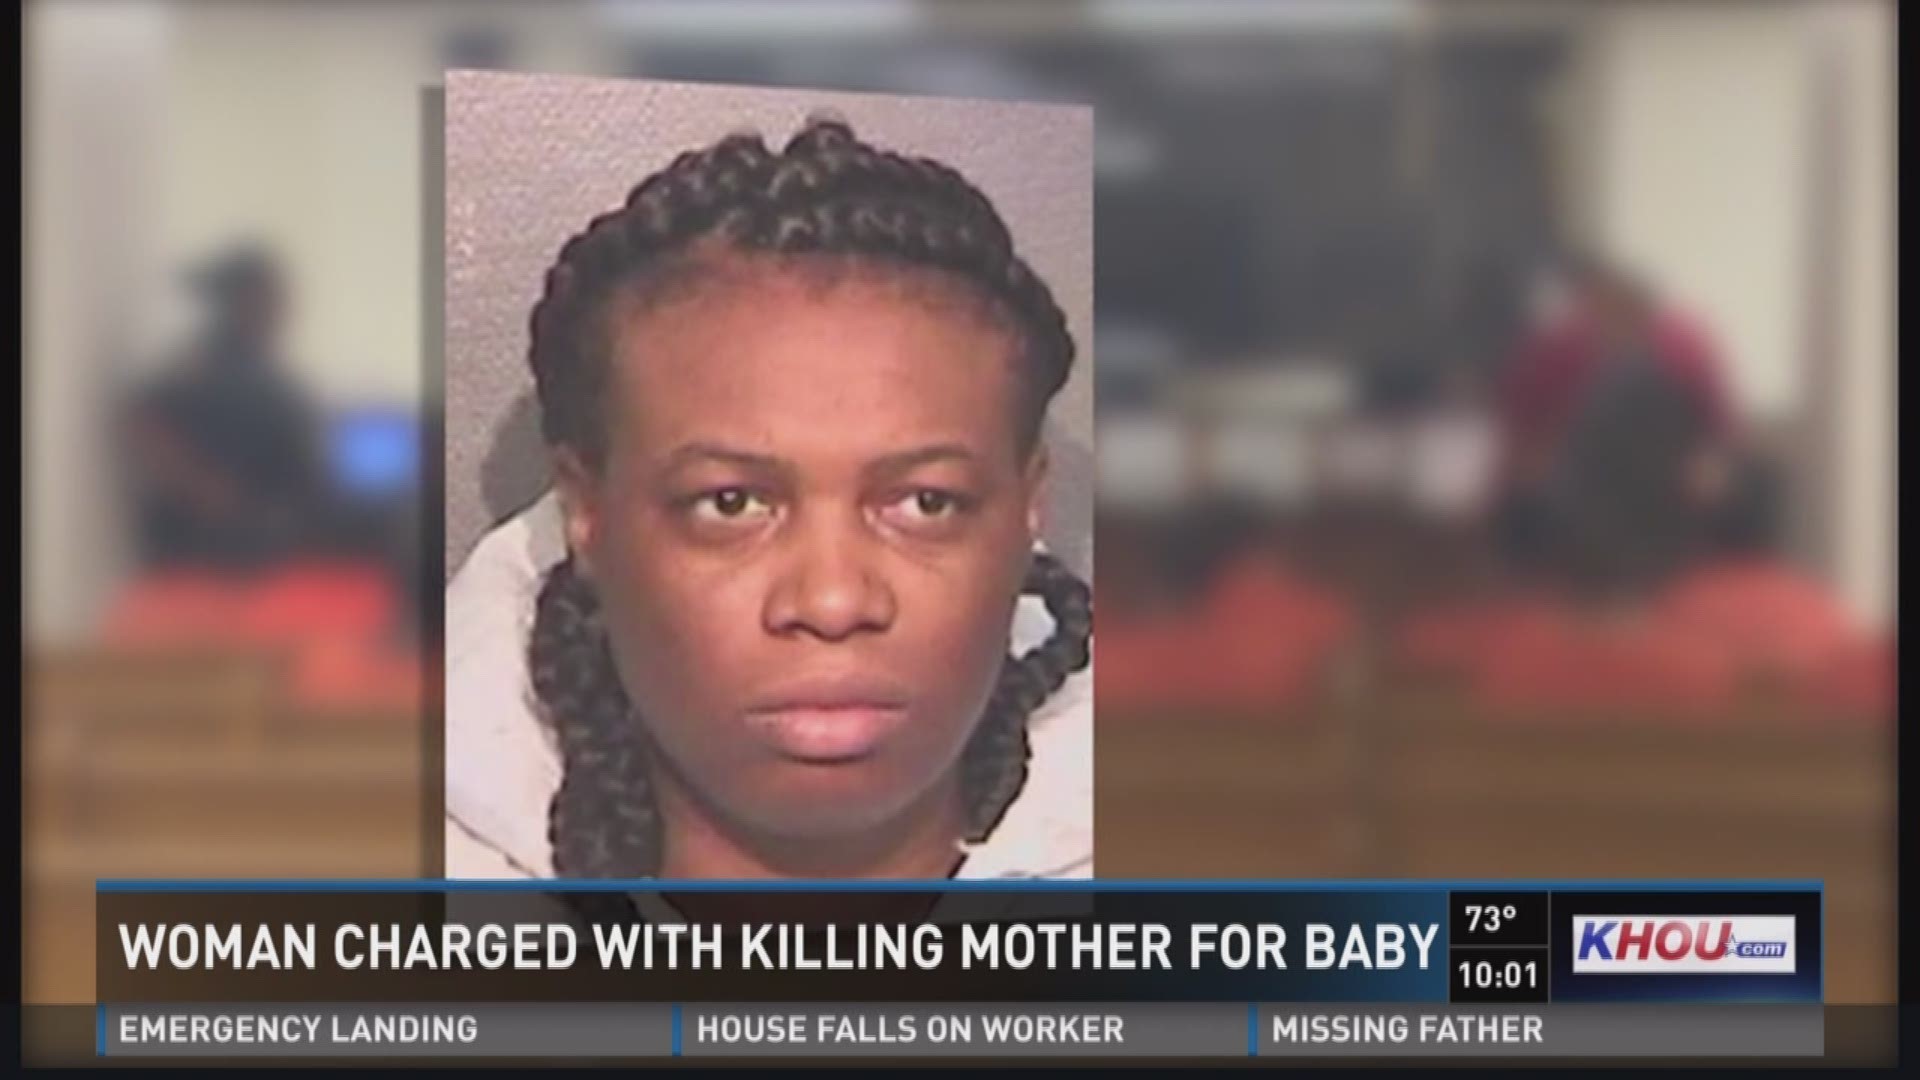 Police say the woman who killed a Houston mother and took her 6-week-old baby earlier this week was trying to cover up a miscarriage.